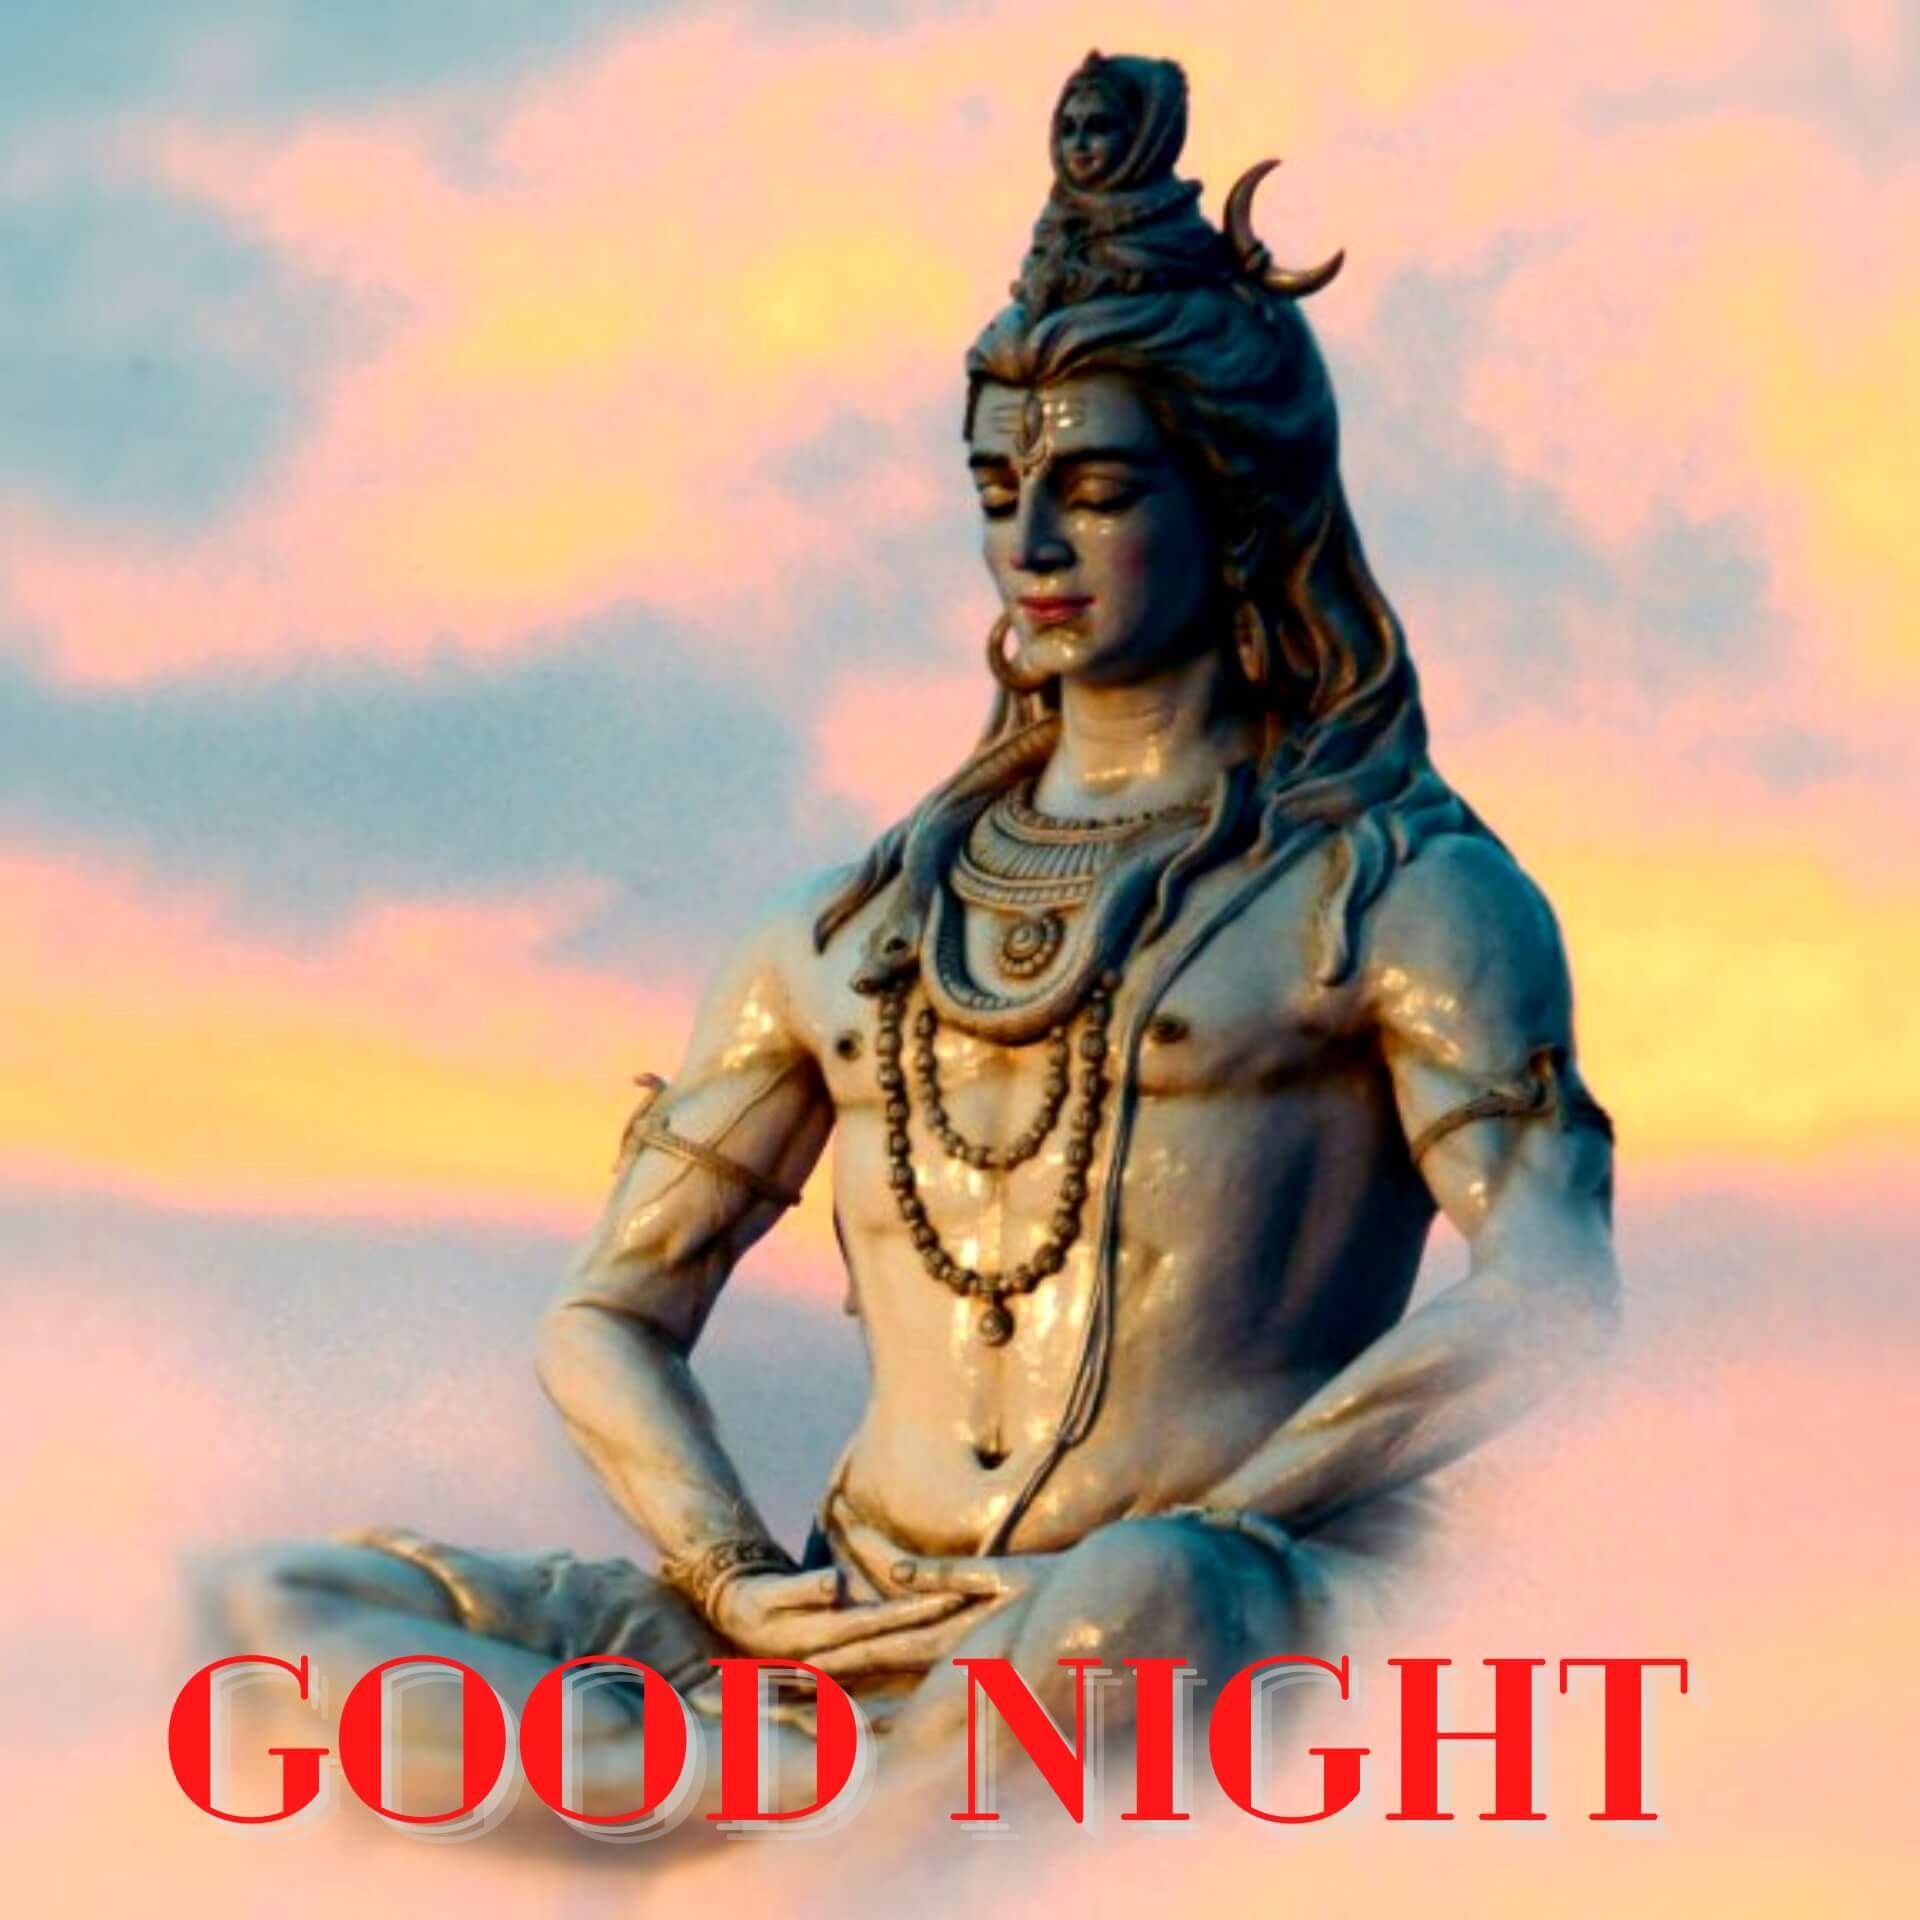 God Good Night Images Wallpaper Pics With Lord Shiva